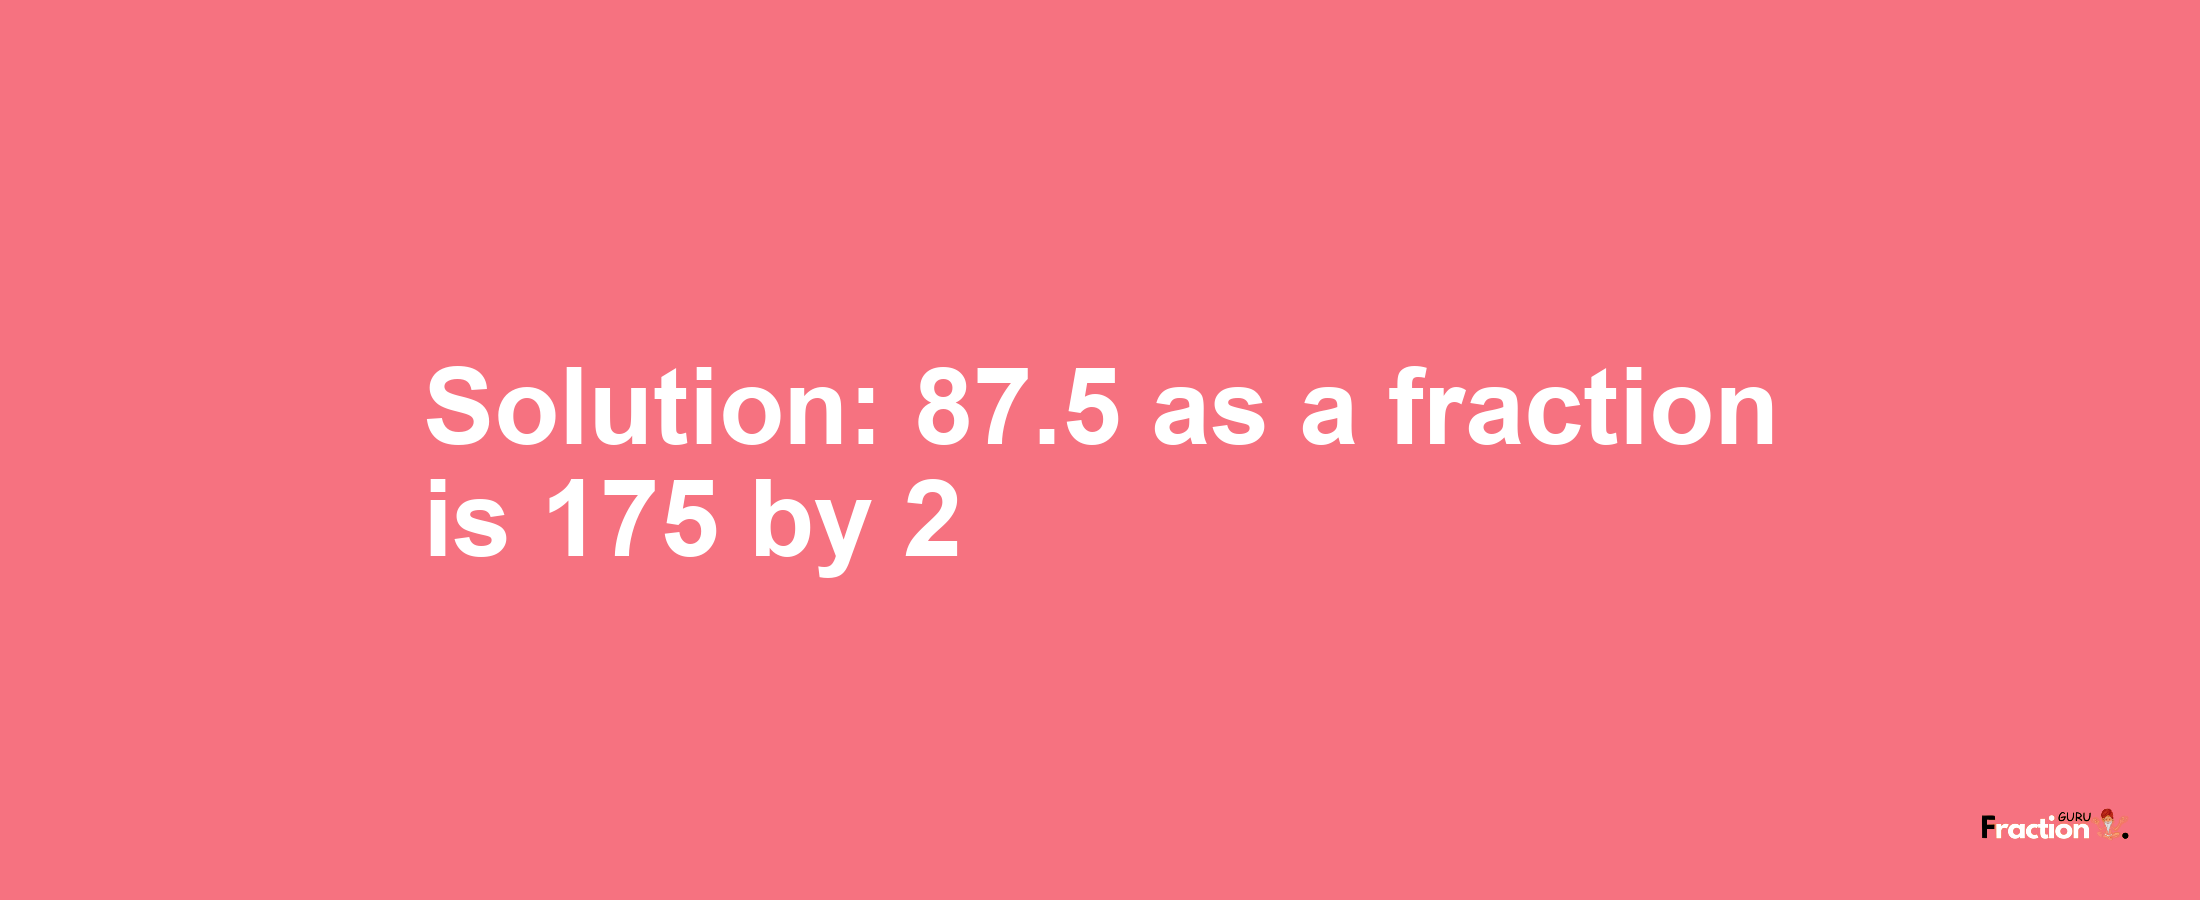 Solution:87.5 as a fraction is 175/2